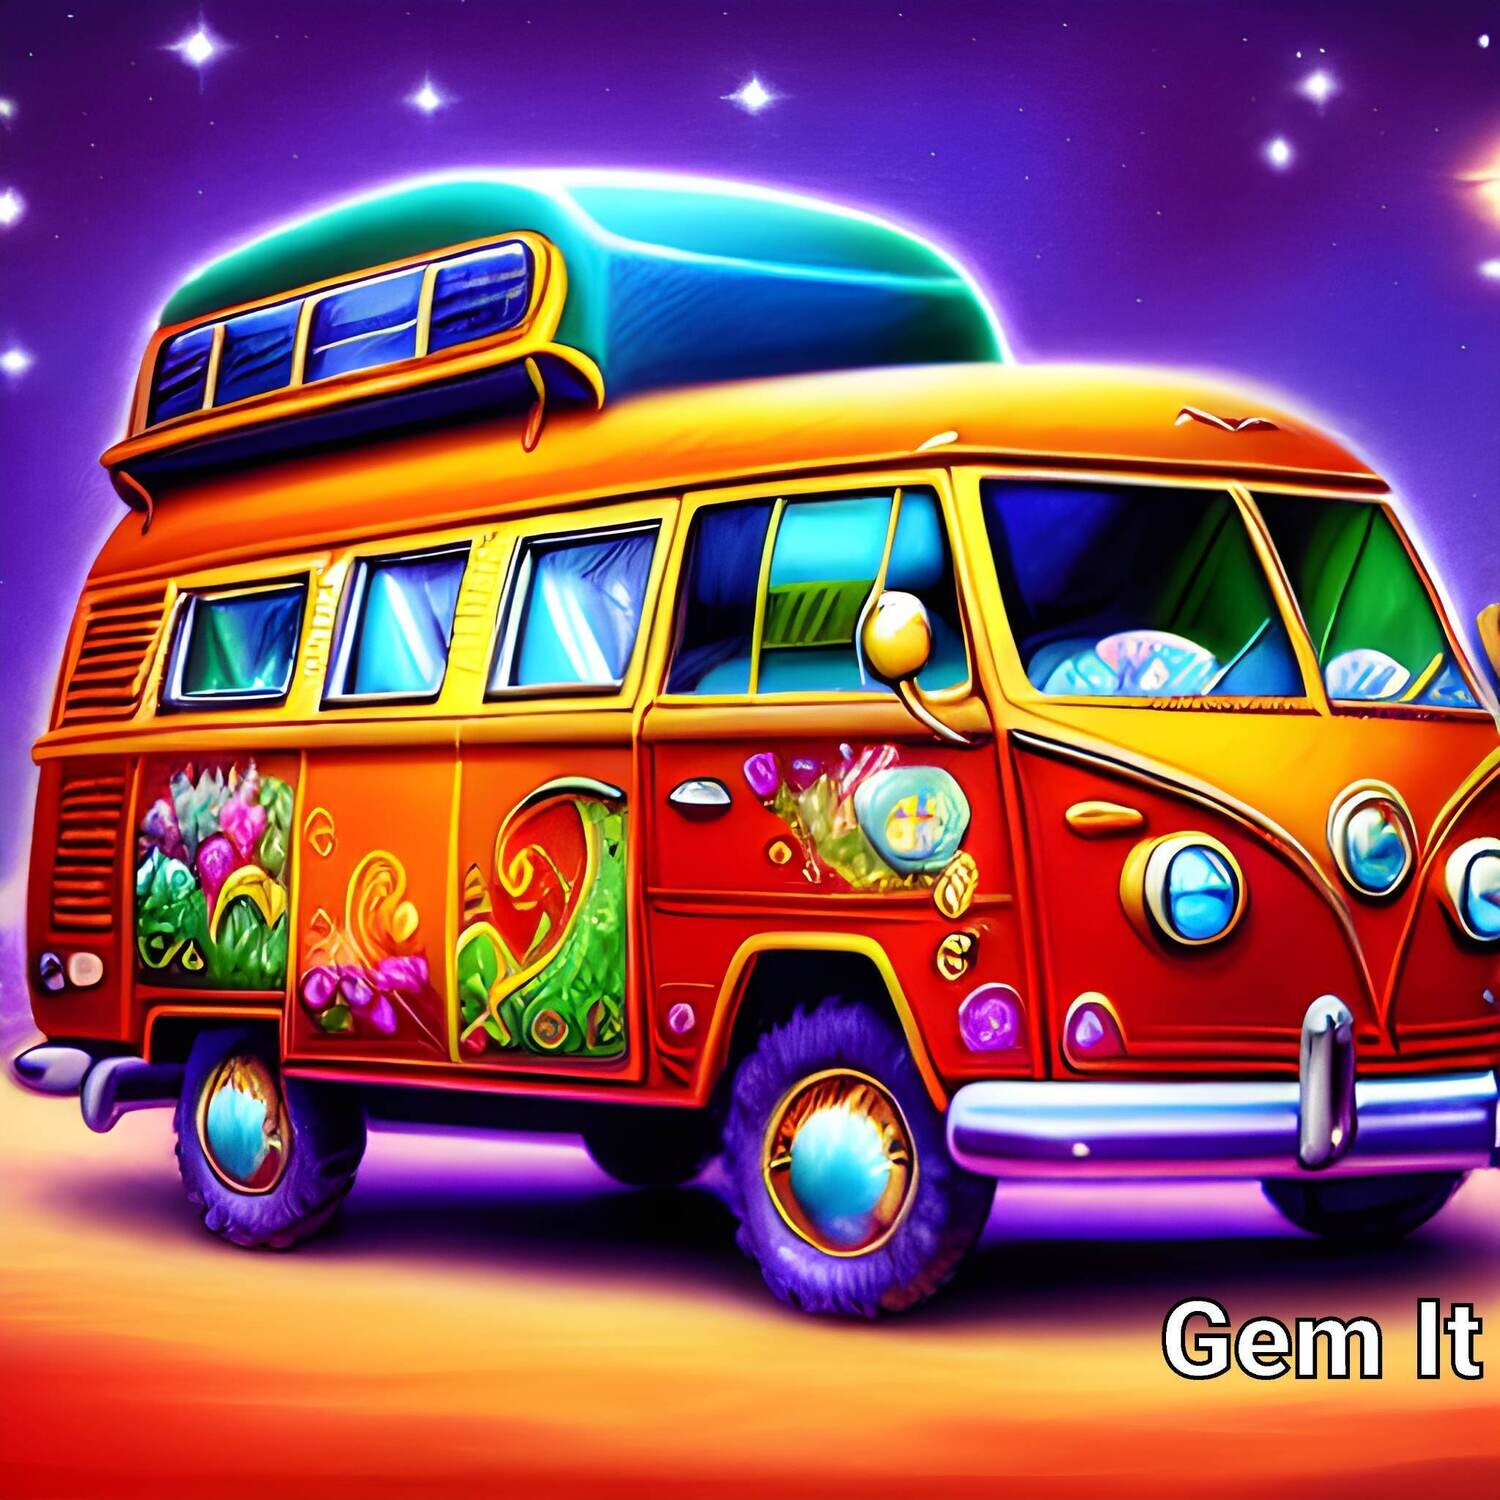 Campervan - Full Drill Diamond Painting - Specially ordered for you. Delivery is approximately 4 - 6 weeks.